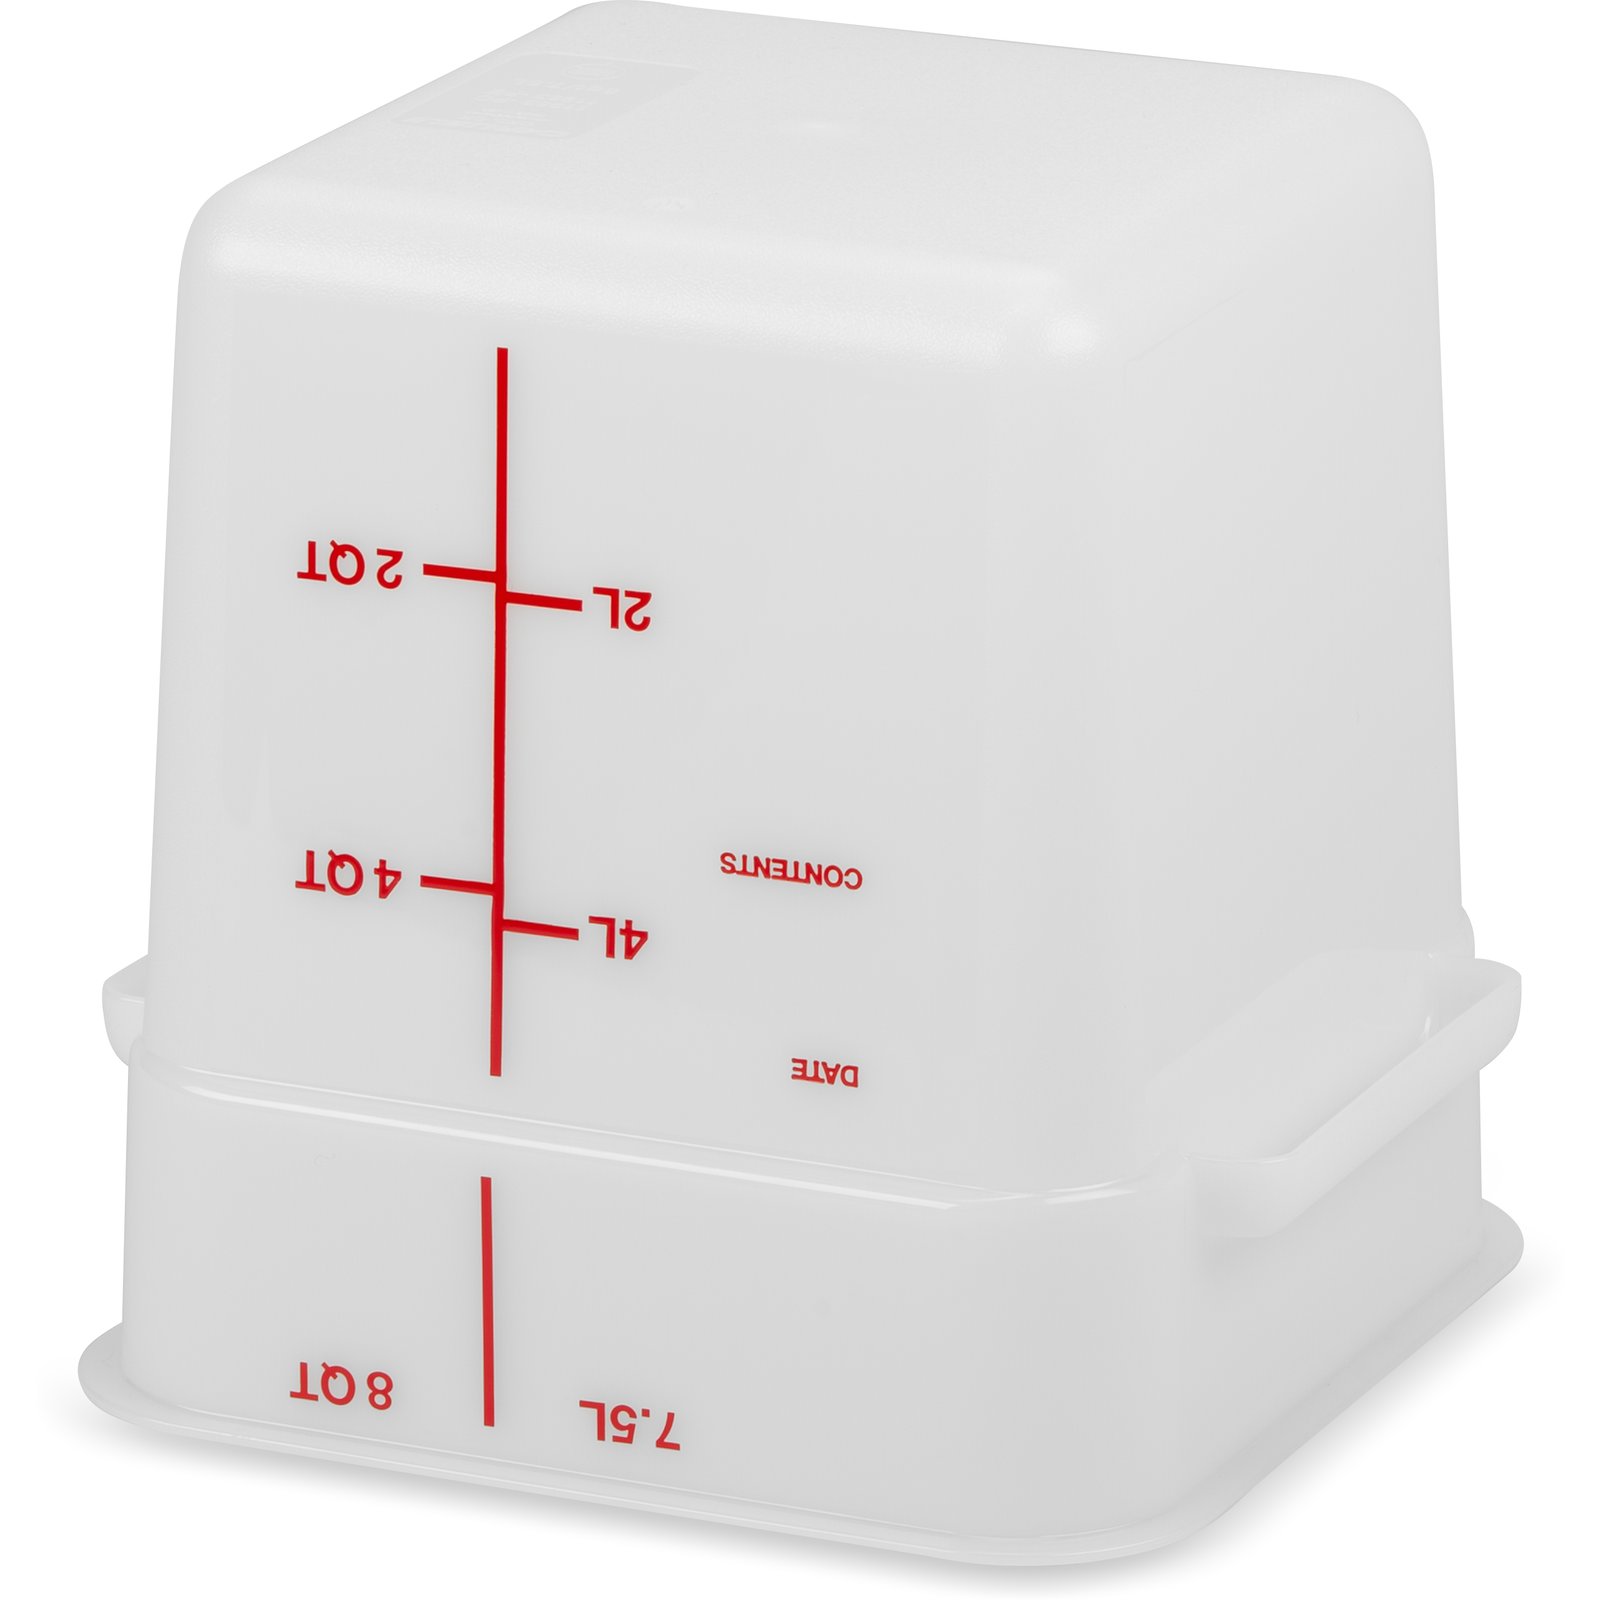 11963-202 - Squares Polyethylene Food Storage Containers & Lids - 2-Pack 8  qt - White